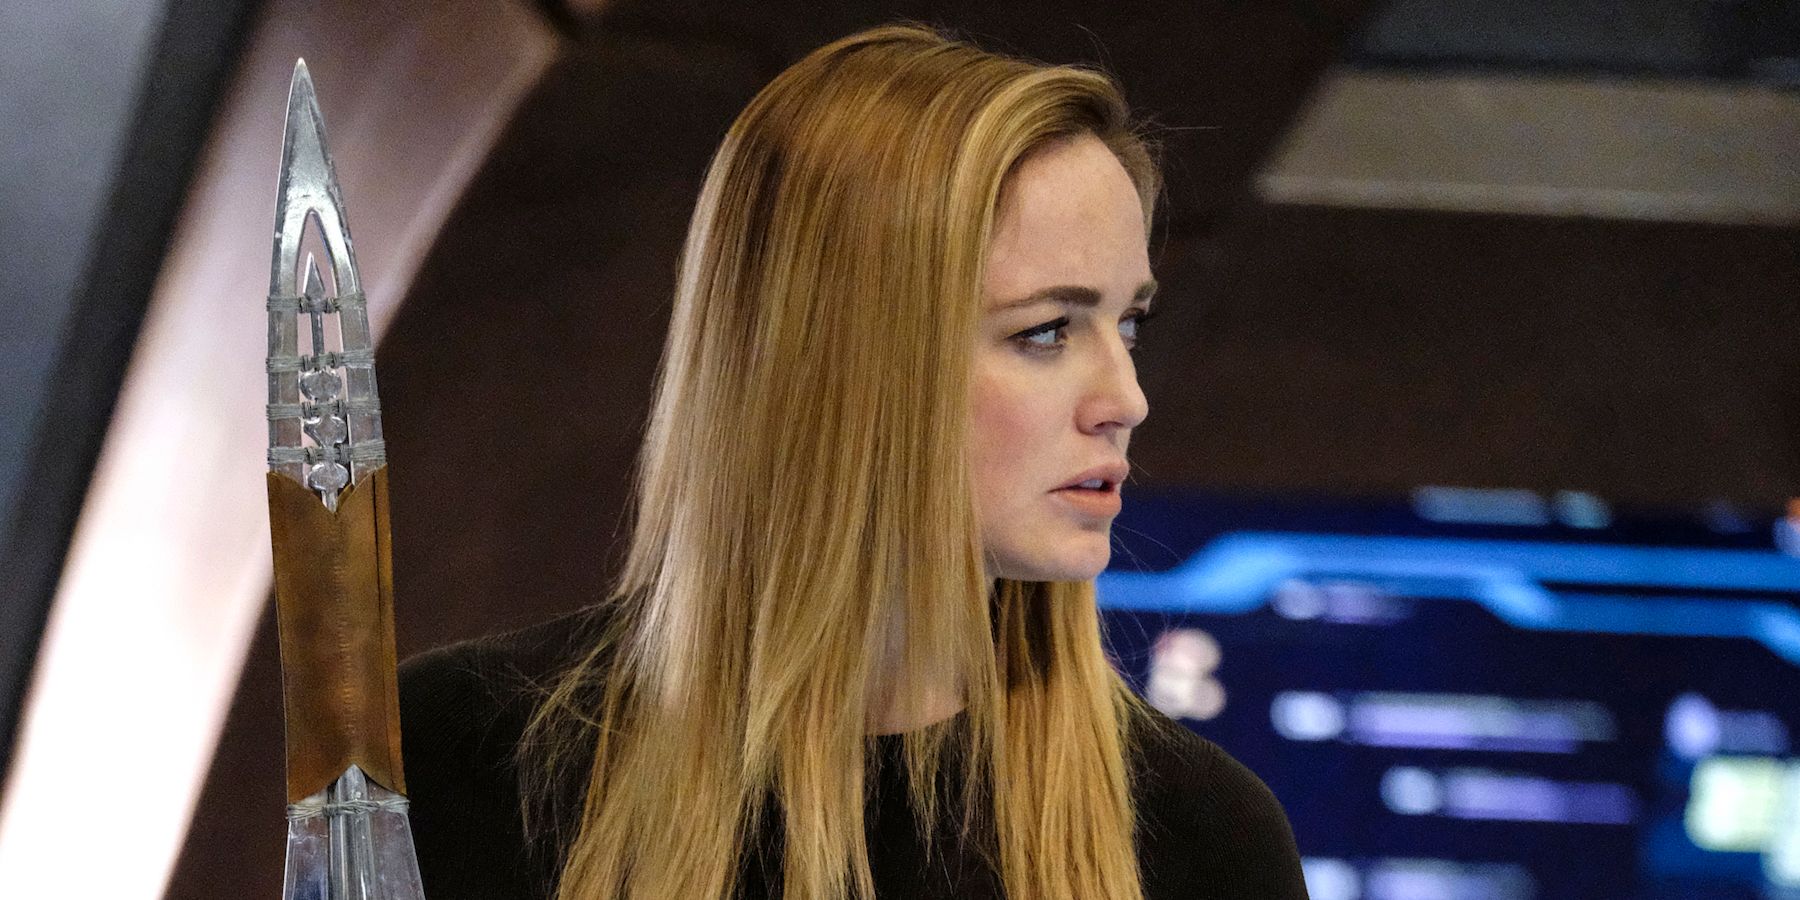 Sara Lance holds a spear in Legends of Tomorrow